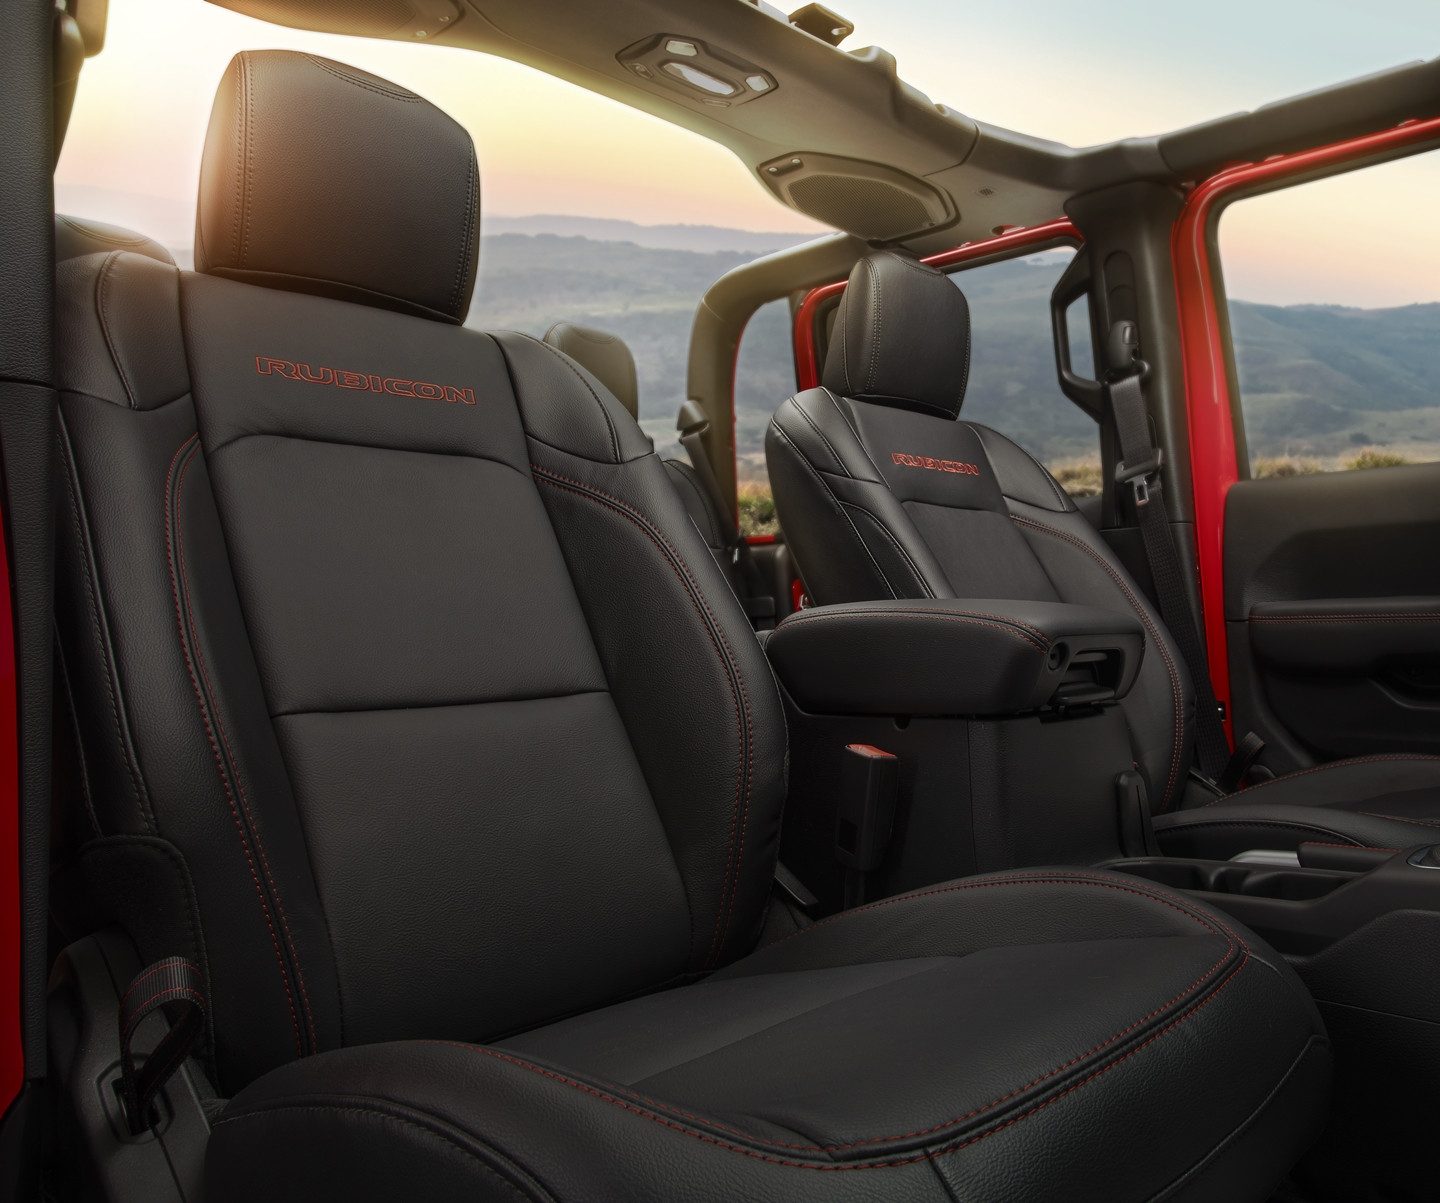 The interior of the 2023 Jeep Gladiator Mojave with its top off, focusing on the ocean and sky visible through the windshield, open roof and open window.